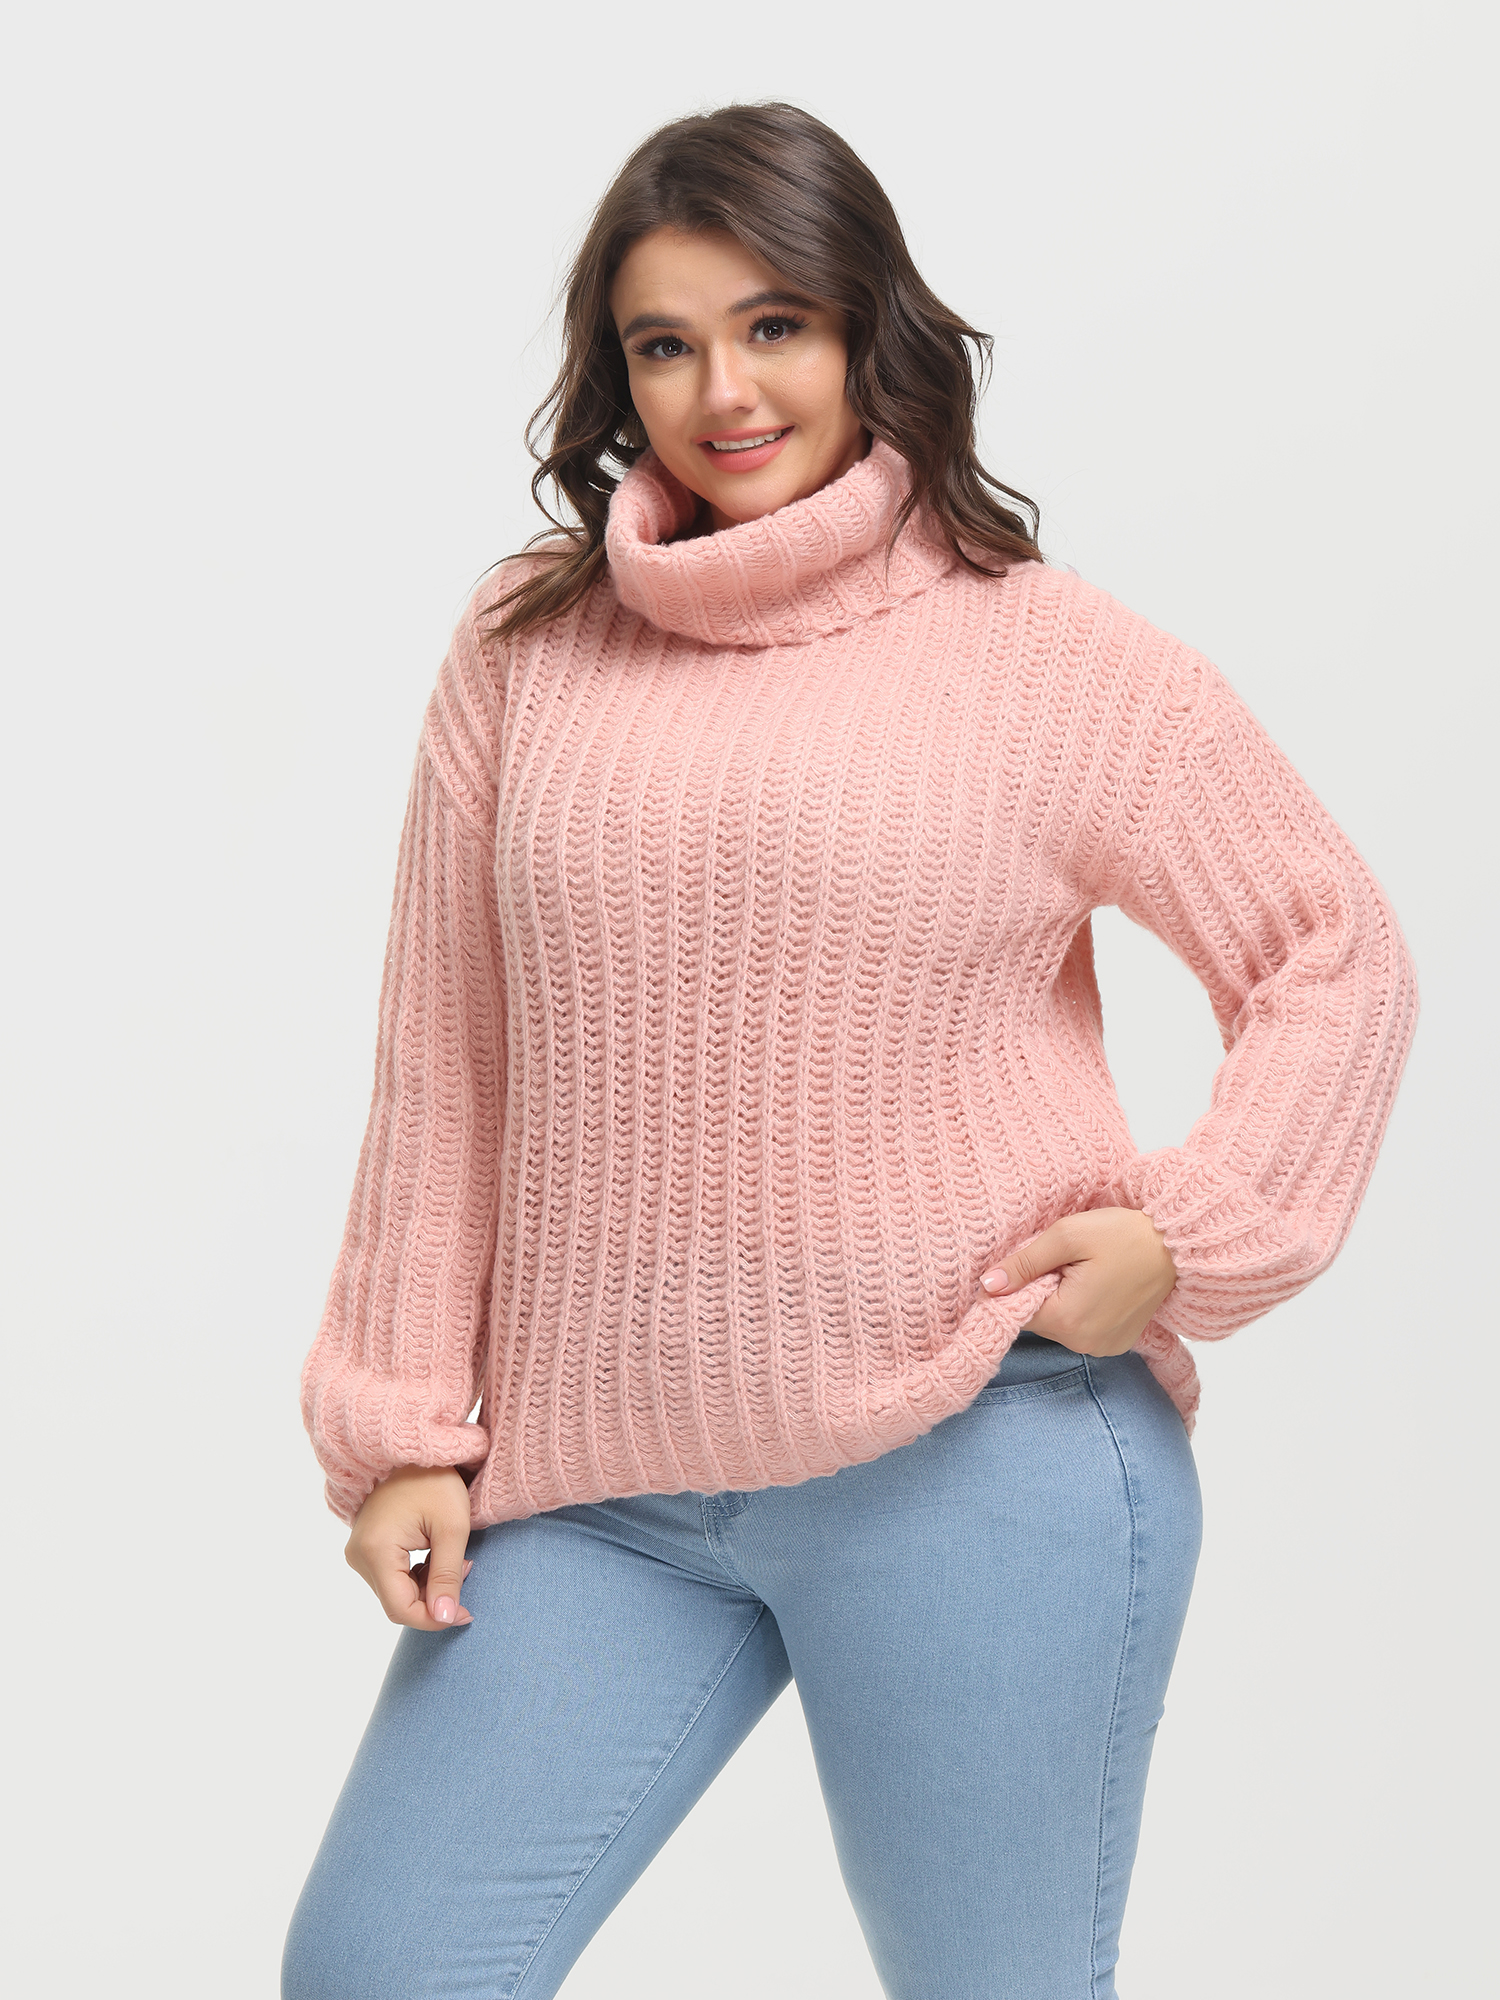 Midsize Puffy Turtleneck Long Sleeve Knit Pullover Sweater